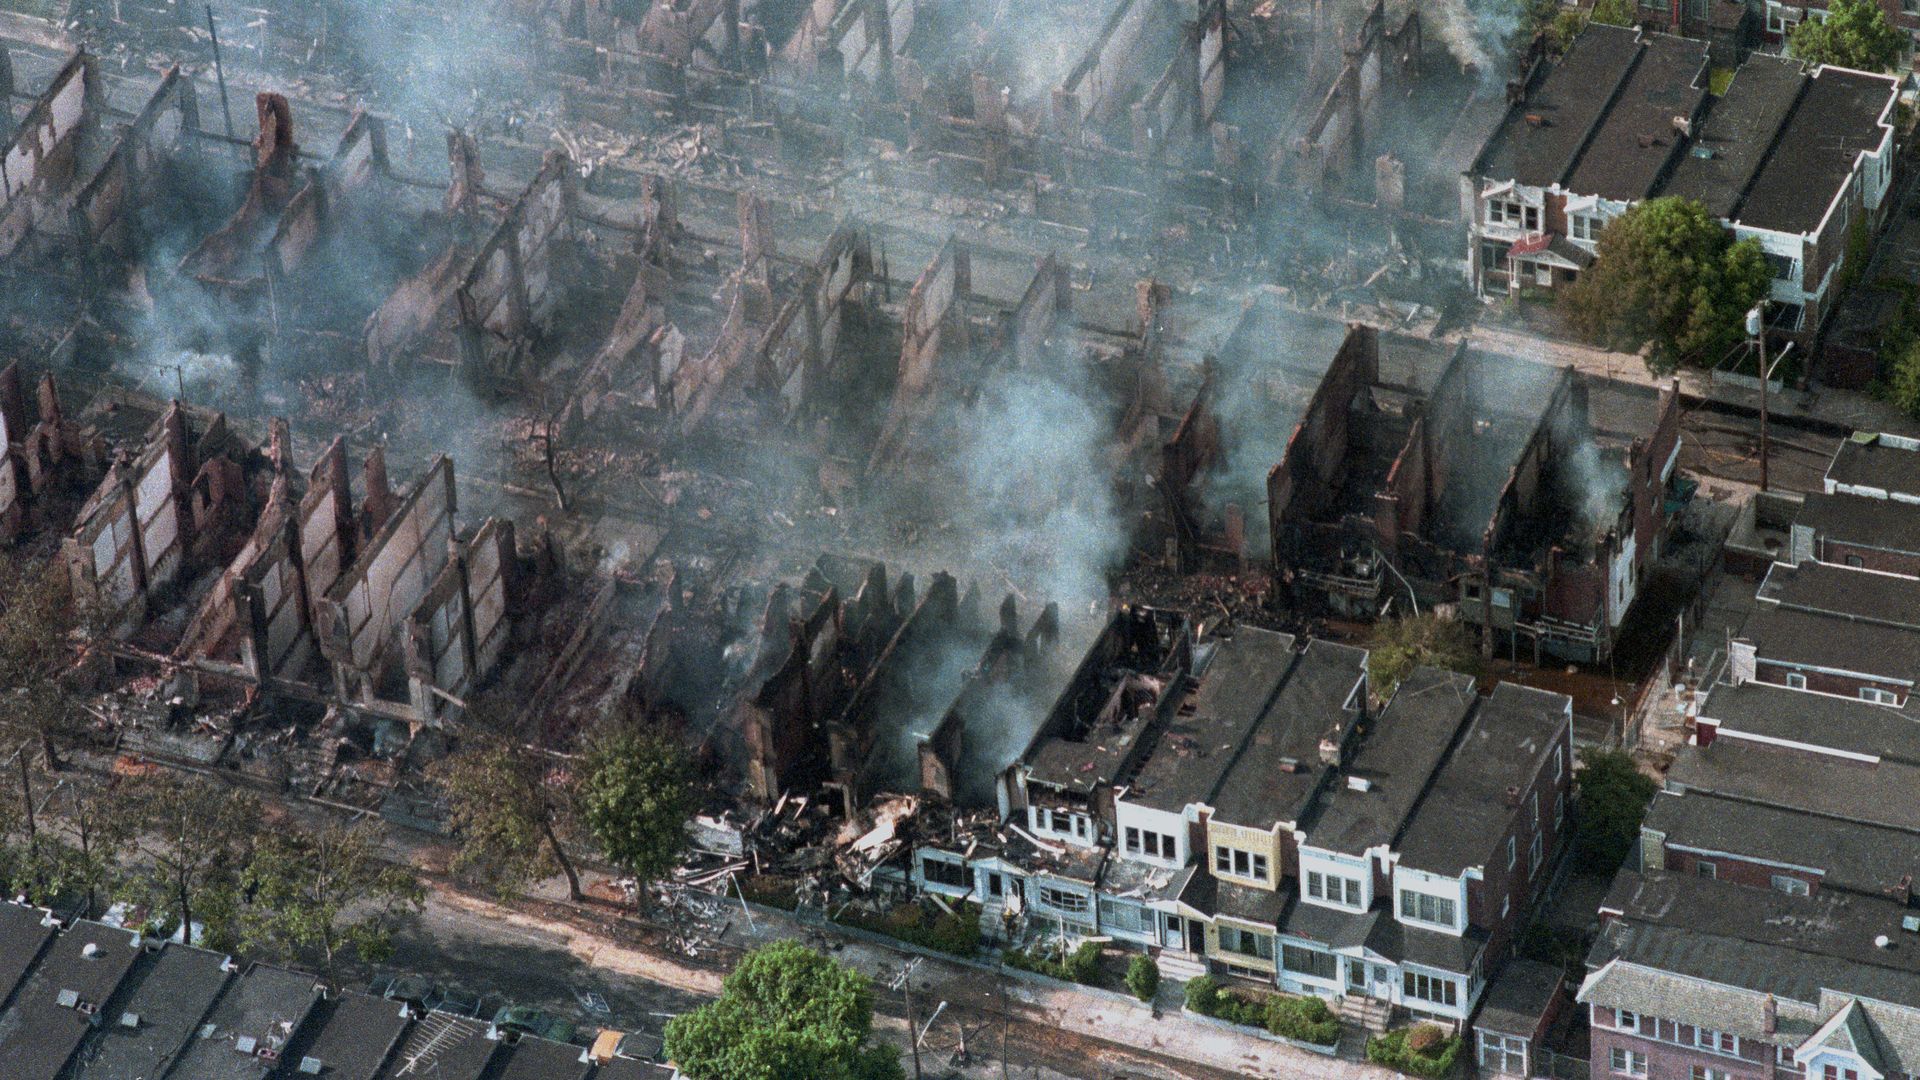 An aerial photo of the aftermath of the 1985 MOVE bombing in Philadelphia.